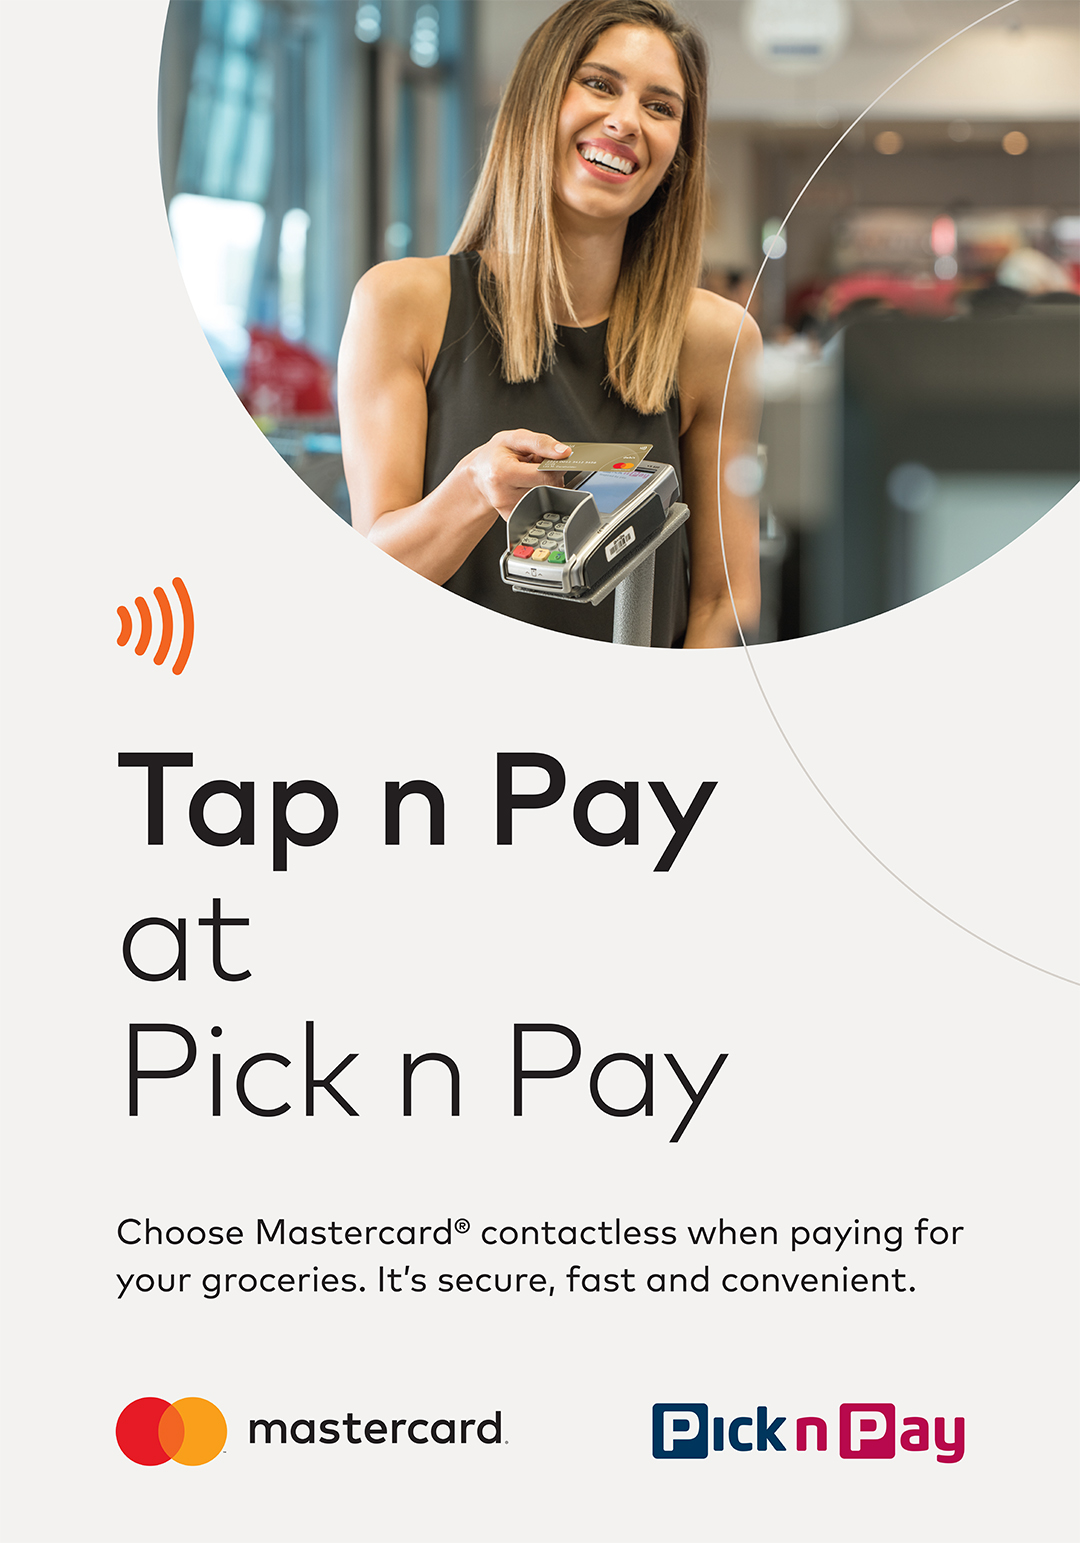 Mastercard Tap n Pay campaign